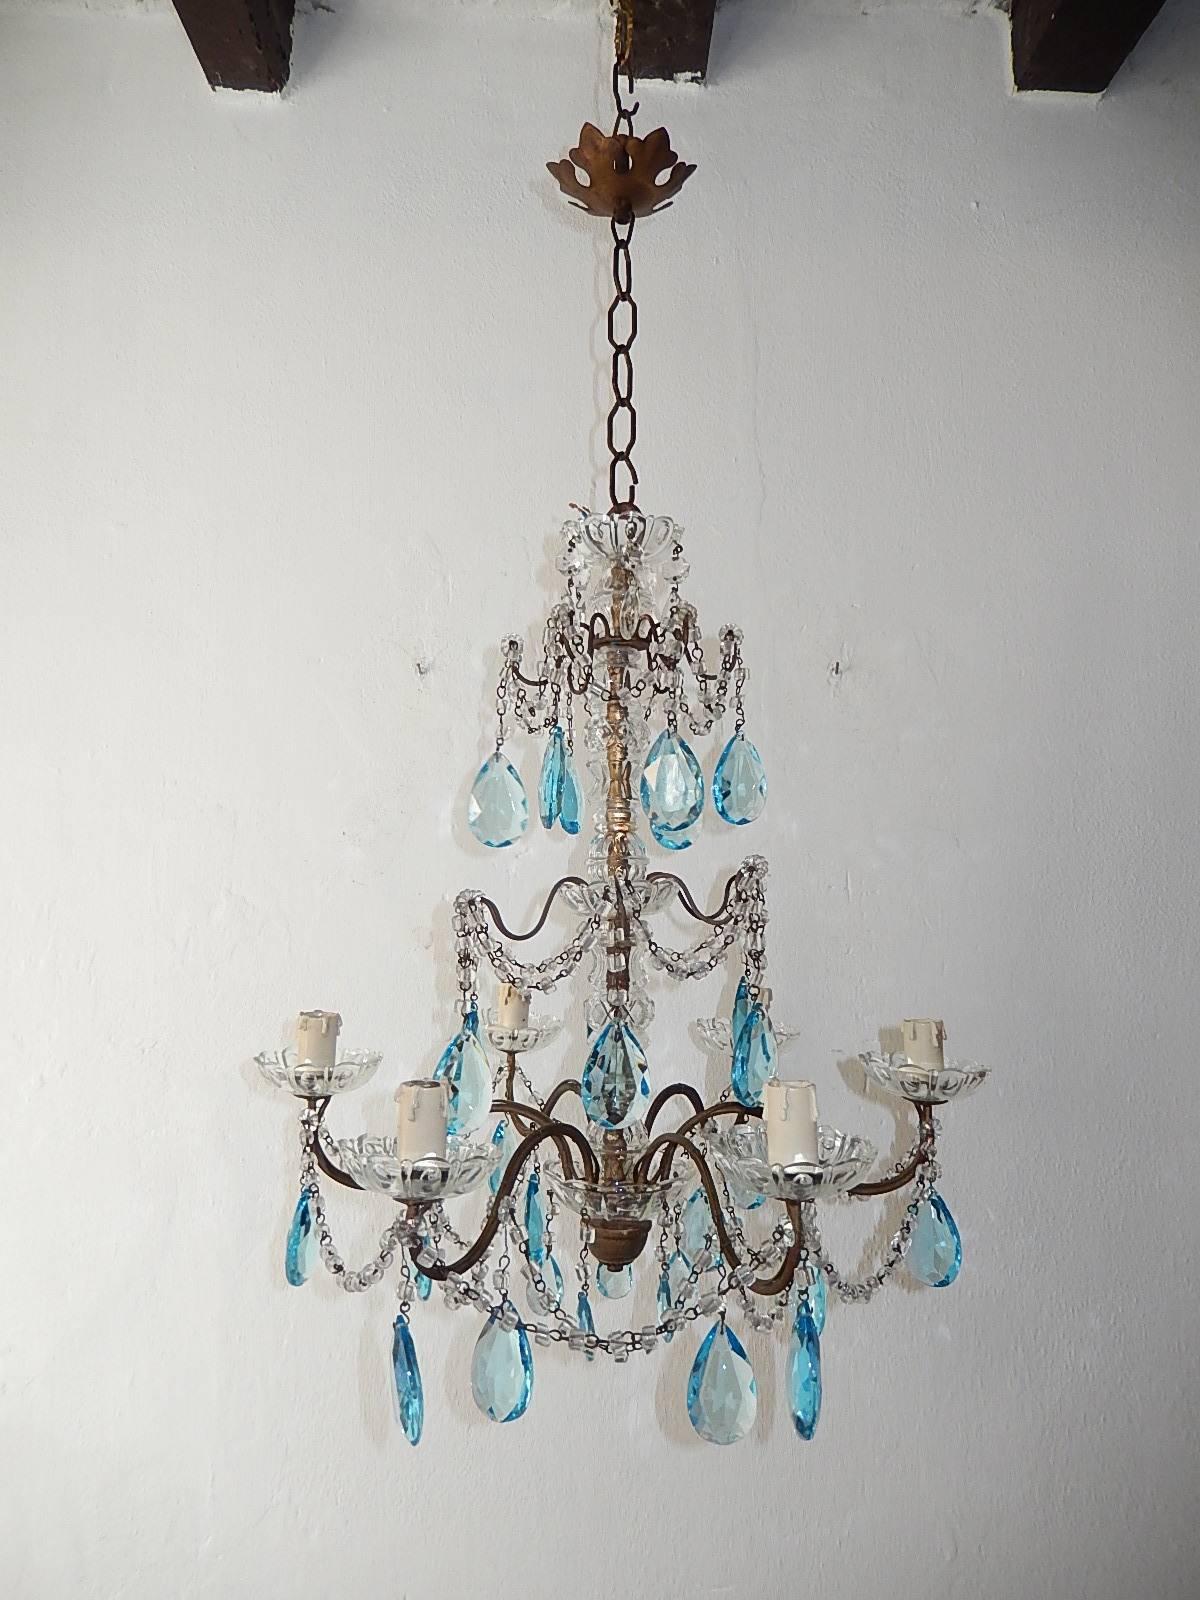 Housing six lights sitting in crystal bobeches. Murano glass centre. Rewired and ready to hang. Swags of macaroni crystal beads with rare aqua crystal prisms. Bobeches on top, middle and bottom. Also a giltwood finial. Adding another 9 inches of